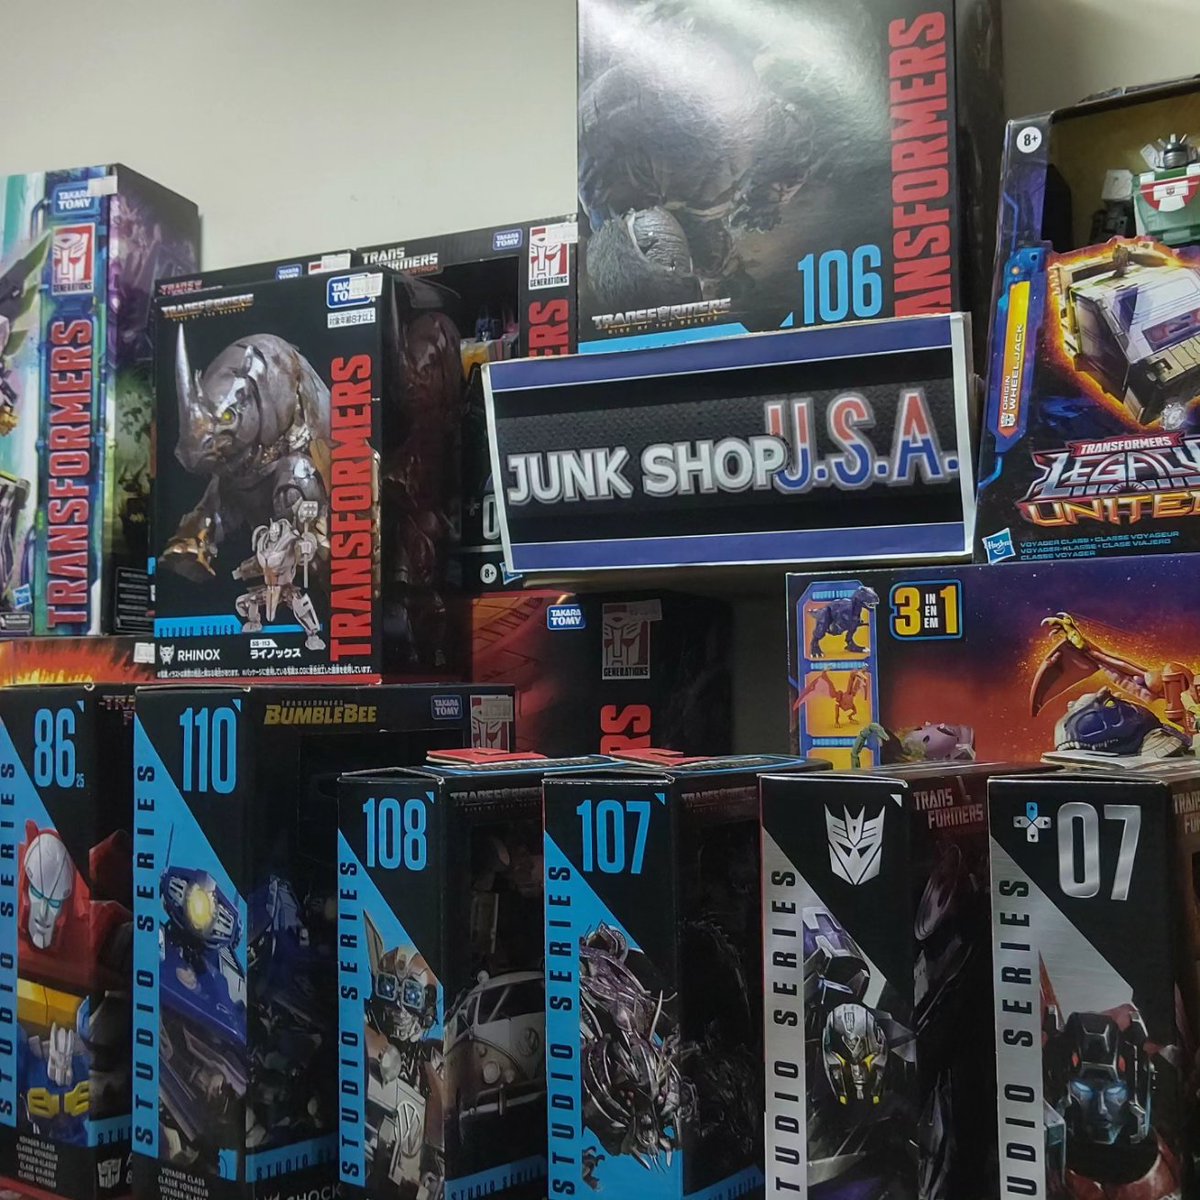 #Transformers
#siege
#shatteredglass
#legacy
#studioseries
#earthspark
#RiseOfTheBeasts      
#buzzworthy
#generationselect
#REACTIVATE
#DIACLON
#TF40th

お店開けさせて頂いております。

いろいろ再入荷させて頂いております✨

次ページに続く↓